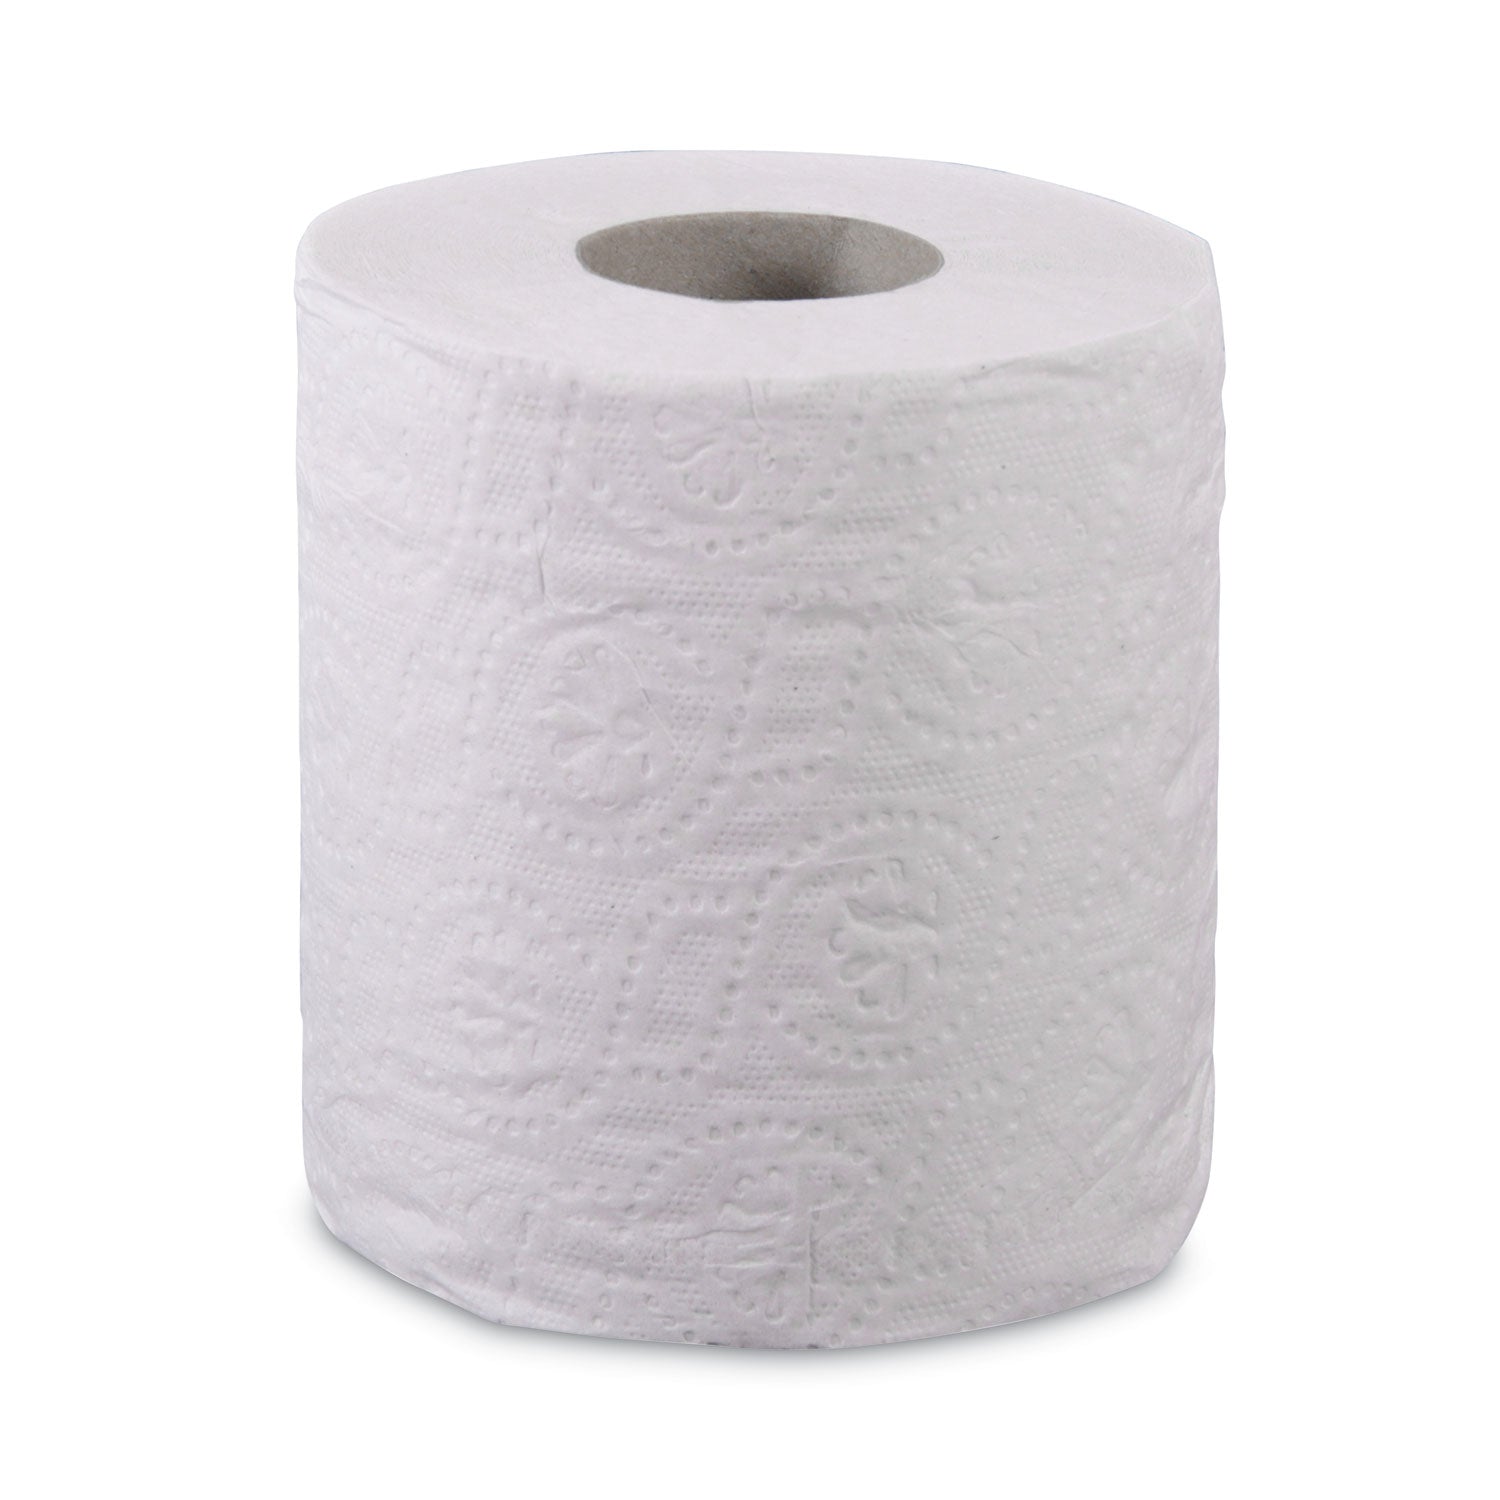 2-Ply Toilet Tissue, Septic Safe, White, 125 ft Roll Length, 500 Sheets/Roll, 96 Rolls/Carton - 